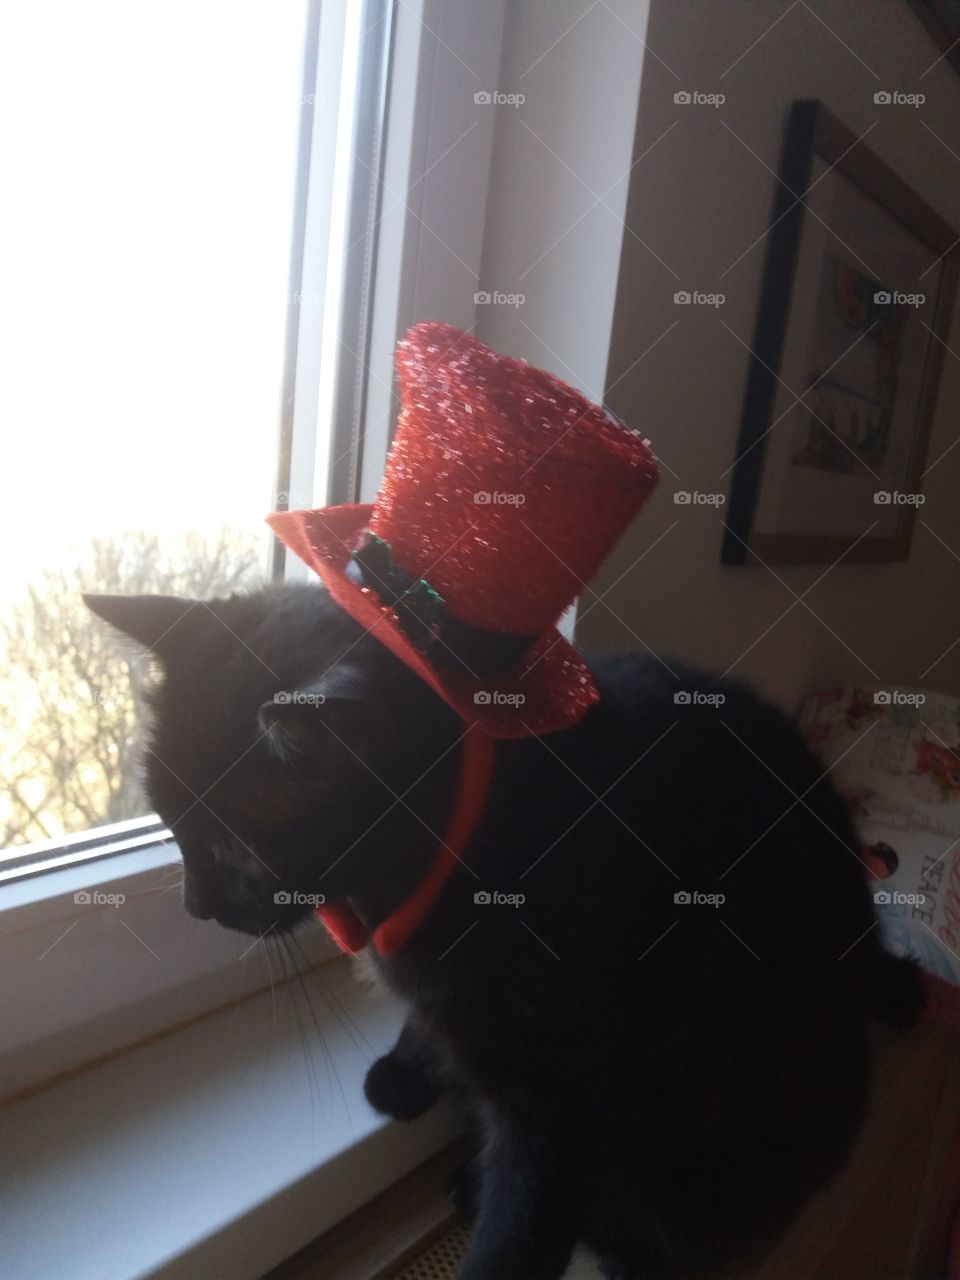 Black cat with a red hat